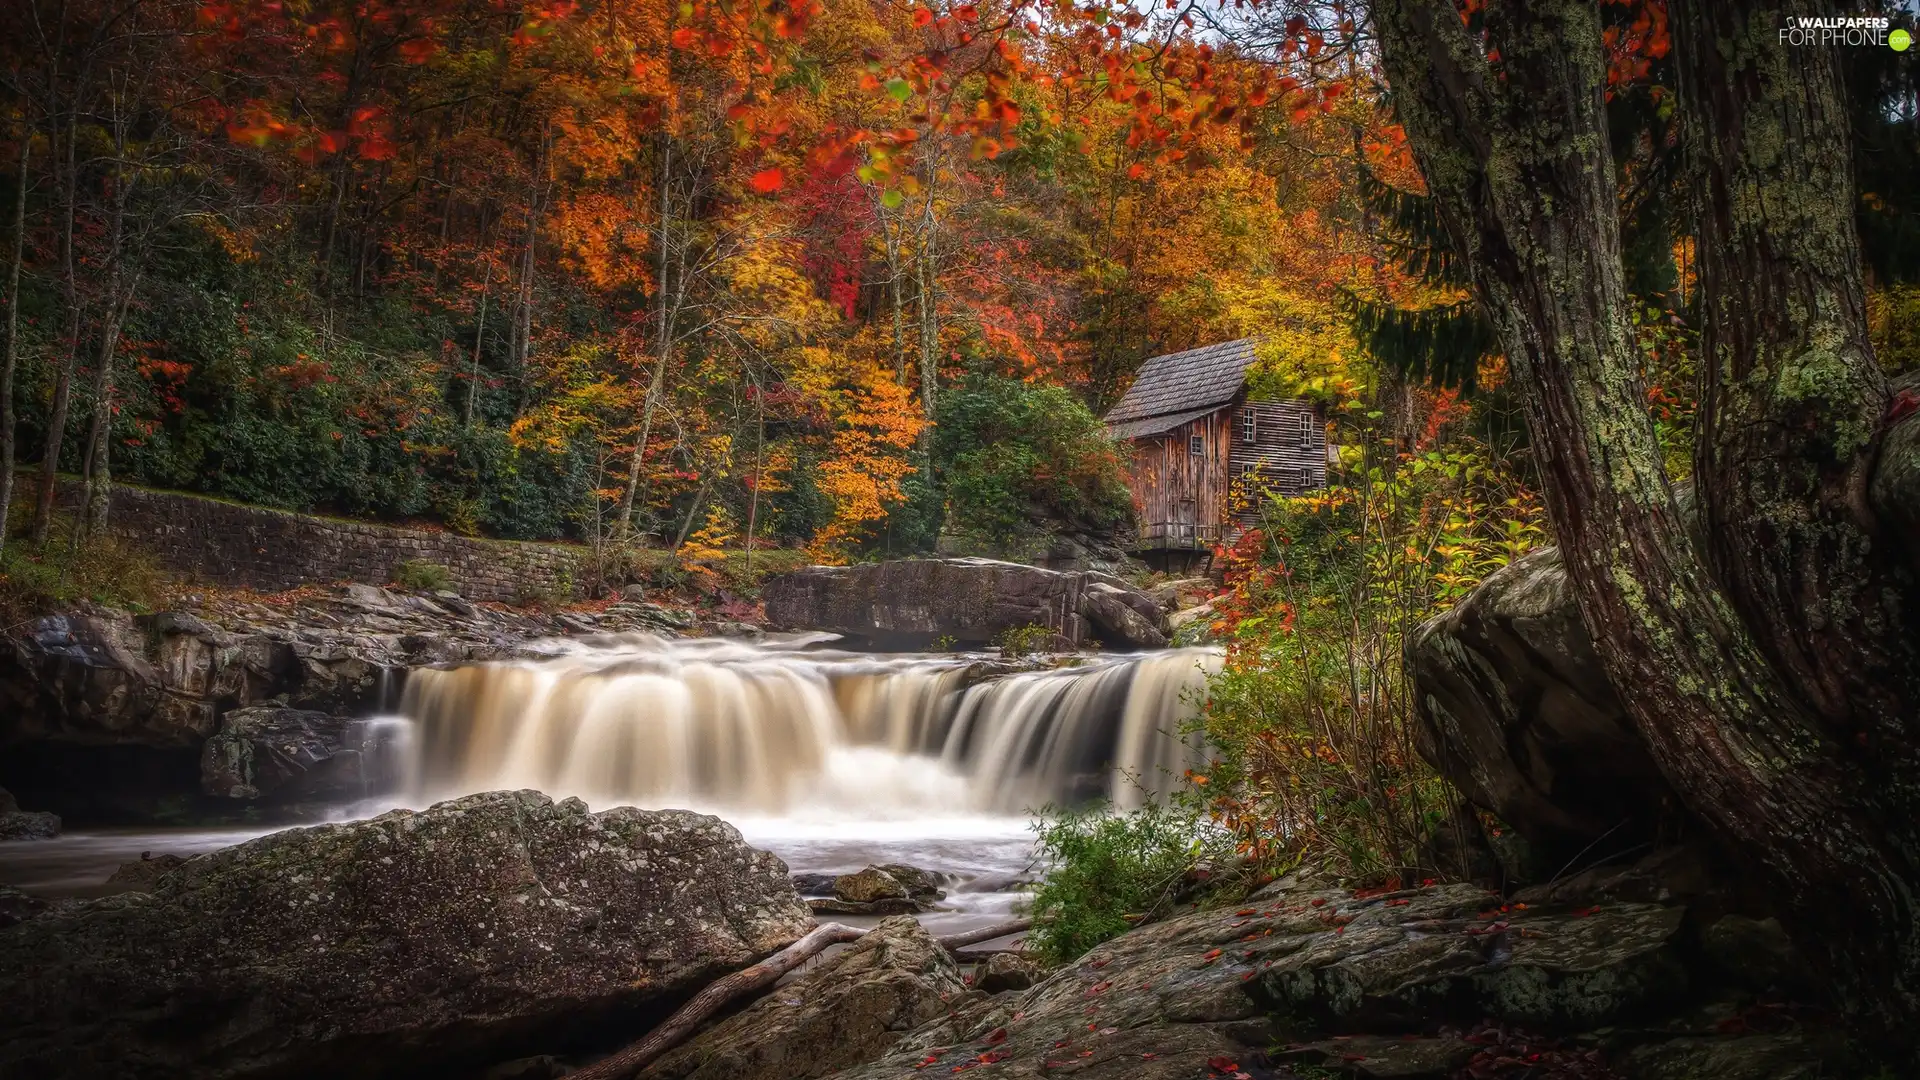 viewes, trees, River, cascade, forest, autumn, Stones, Windmill, rocks